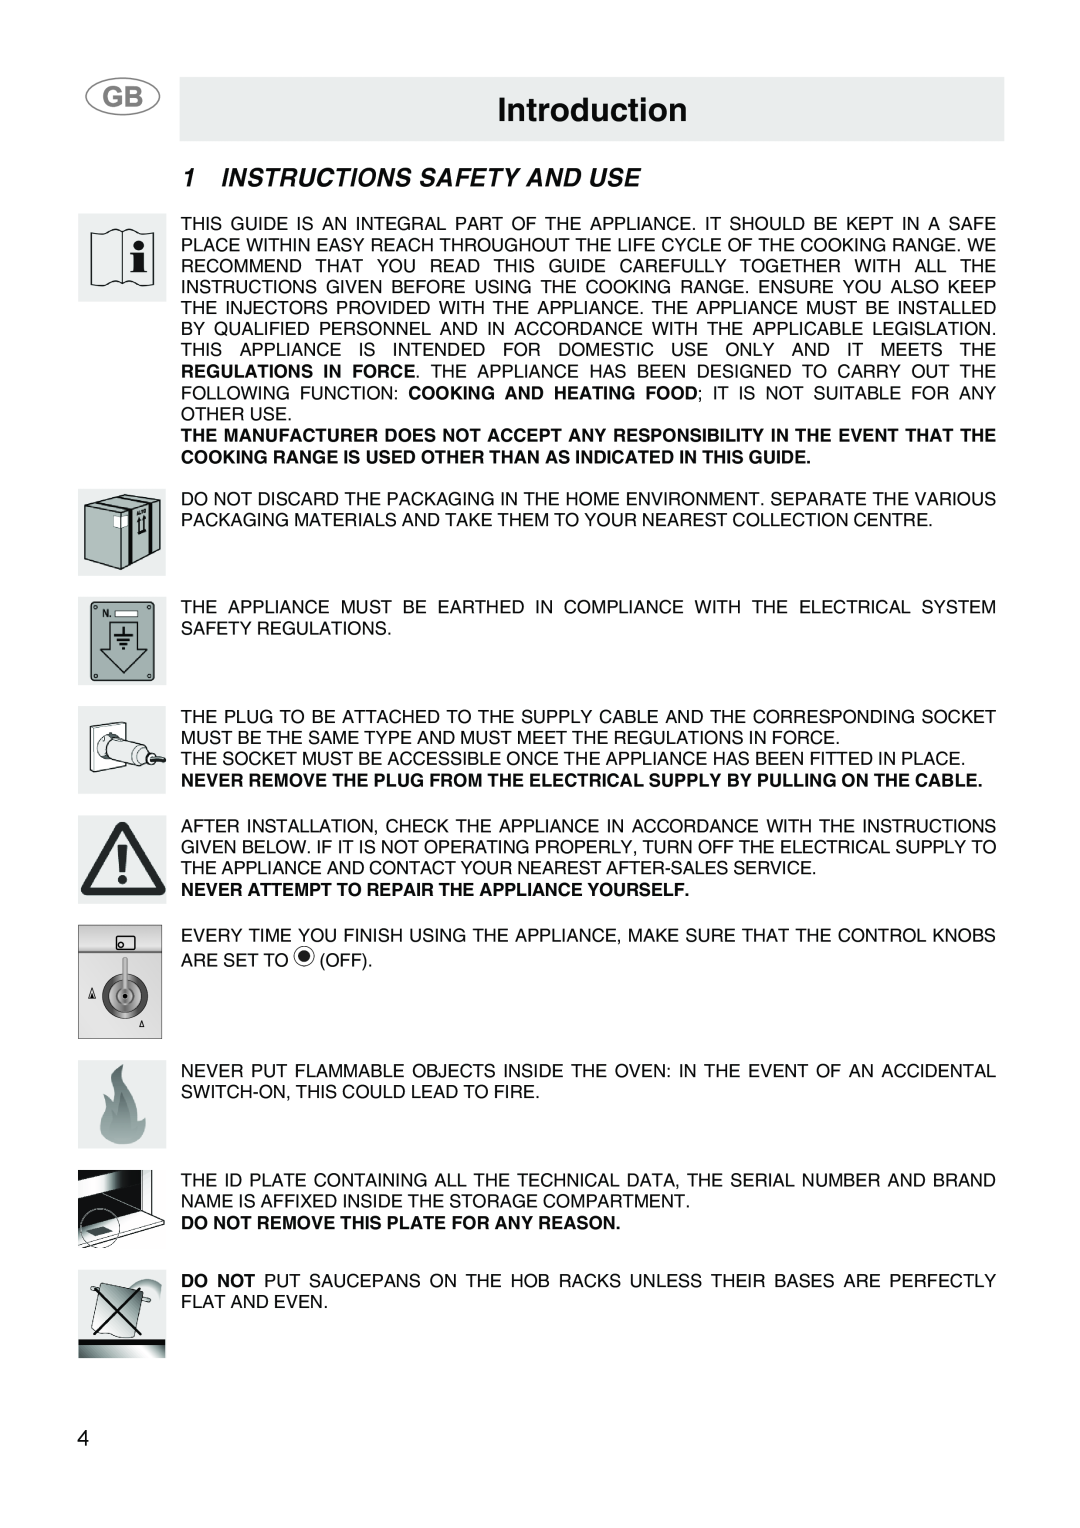 Smeg SA9058X manual Introduction, Instructions Safety And Use 